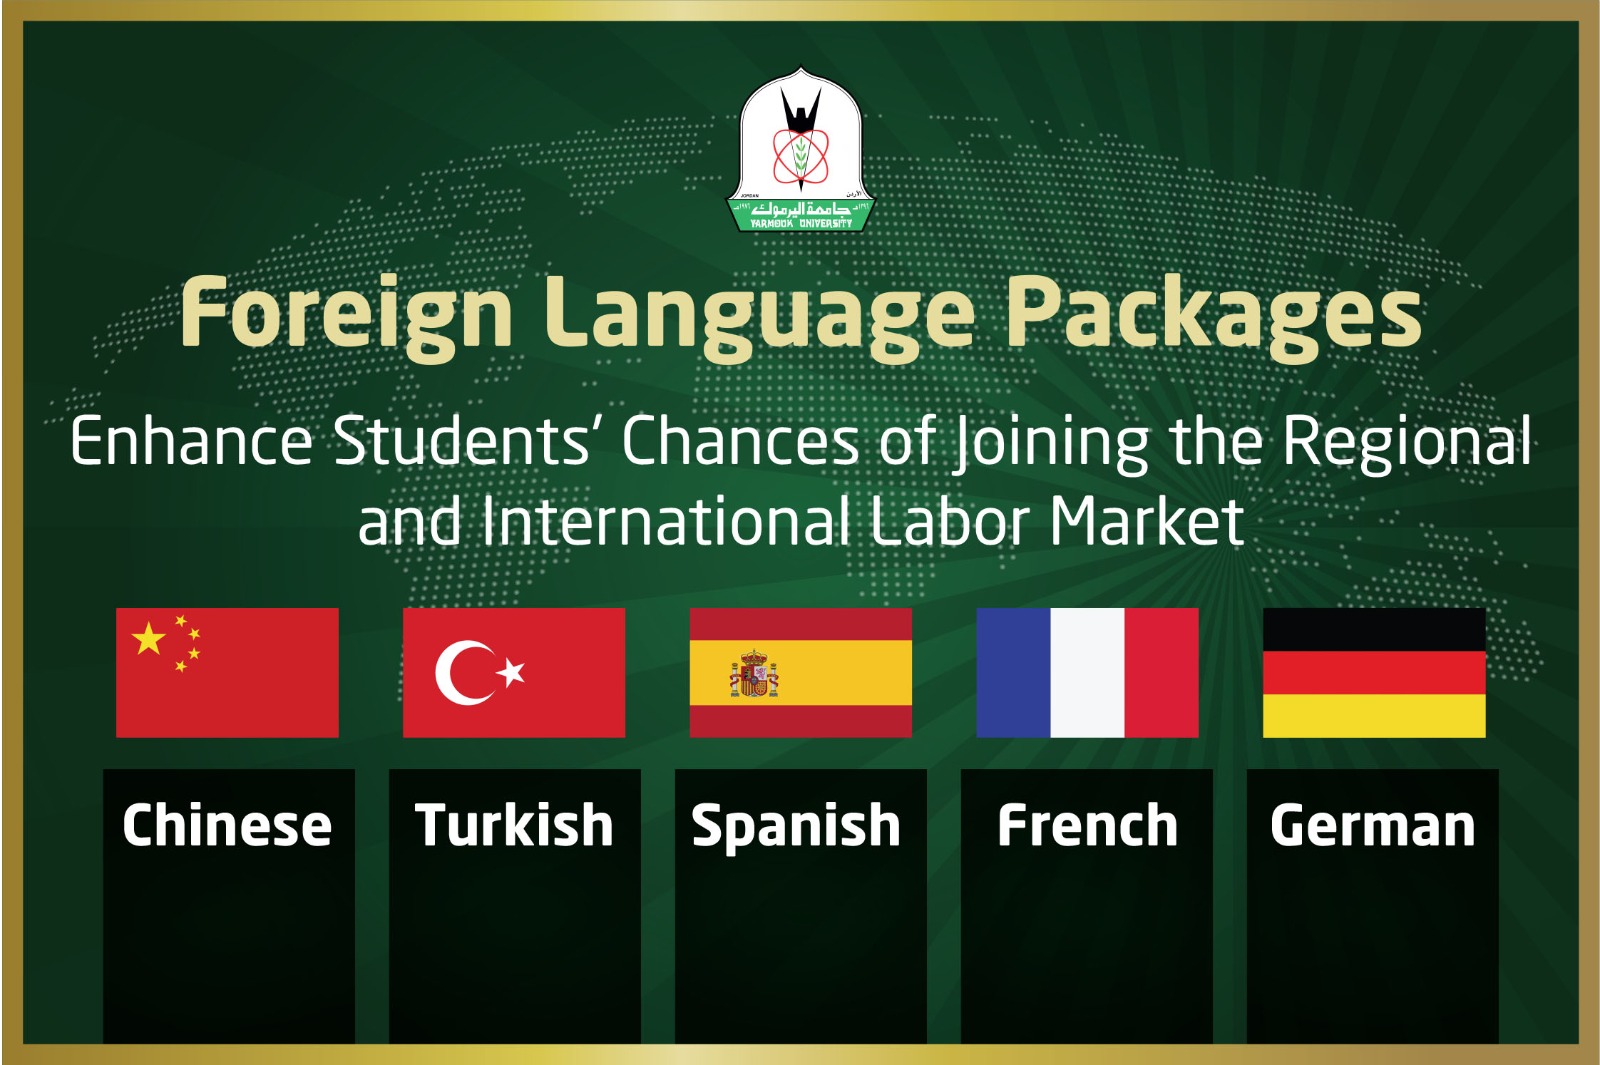 Yarmouk Offers Foreign Language Packages to Enhance Students' Chances of Joining the Regional and International Labor Market